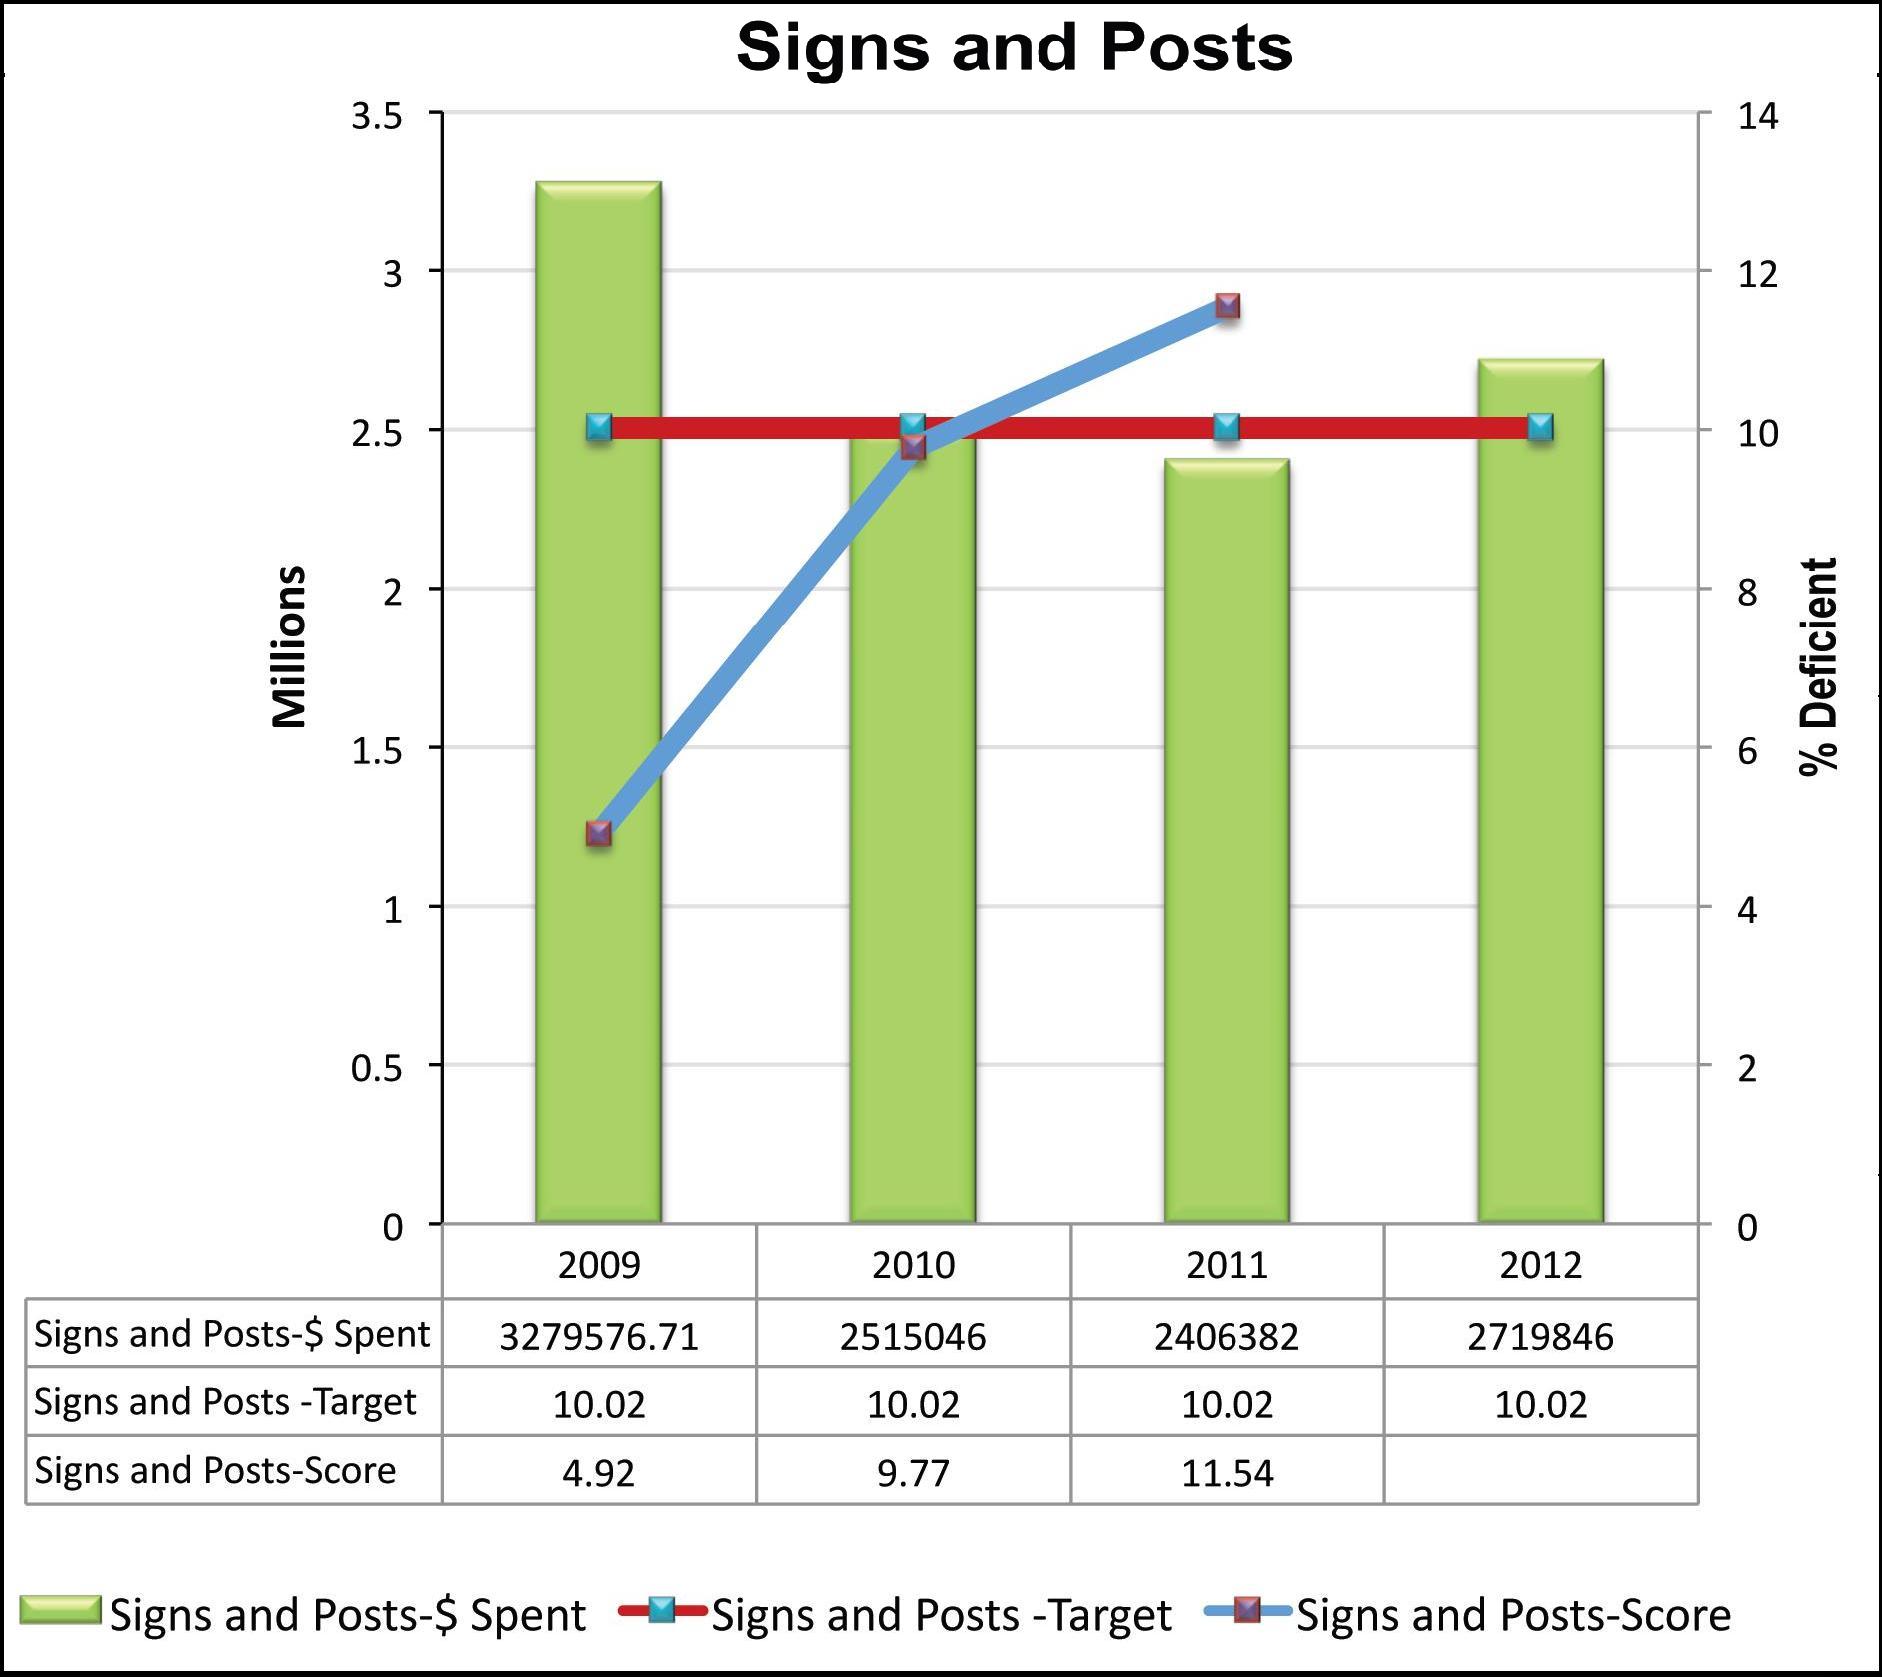 Figure 54 illustrates the amount spent, the targeted condition and the actual score for signs and posts for the years 2009 through 2012.  The chart illustrates that in 2009 sign and post expenditures were at three point two million dollars, and then were reduced in 2010 to 2 point five million and then to 2 point four million in 2011. In 2009, the conditions were very good with deficiencies at 4 point nine percent compared to the target of 10 percent. The deficiencies gradually grew in 2010 and 2011 until they surpassed the target in 2011 with deficiencies of 11 point five percent compared to a target of 10 percent. For 2012, expenditures were increased slightly to two point seven million to address the rising deficiencies.